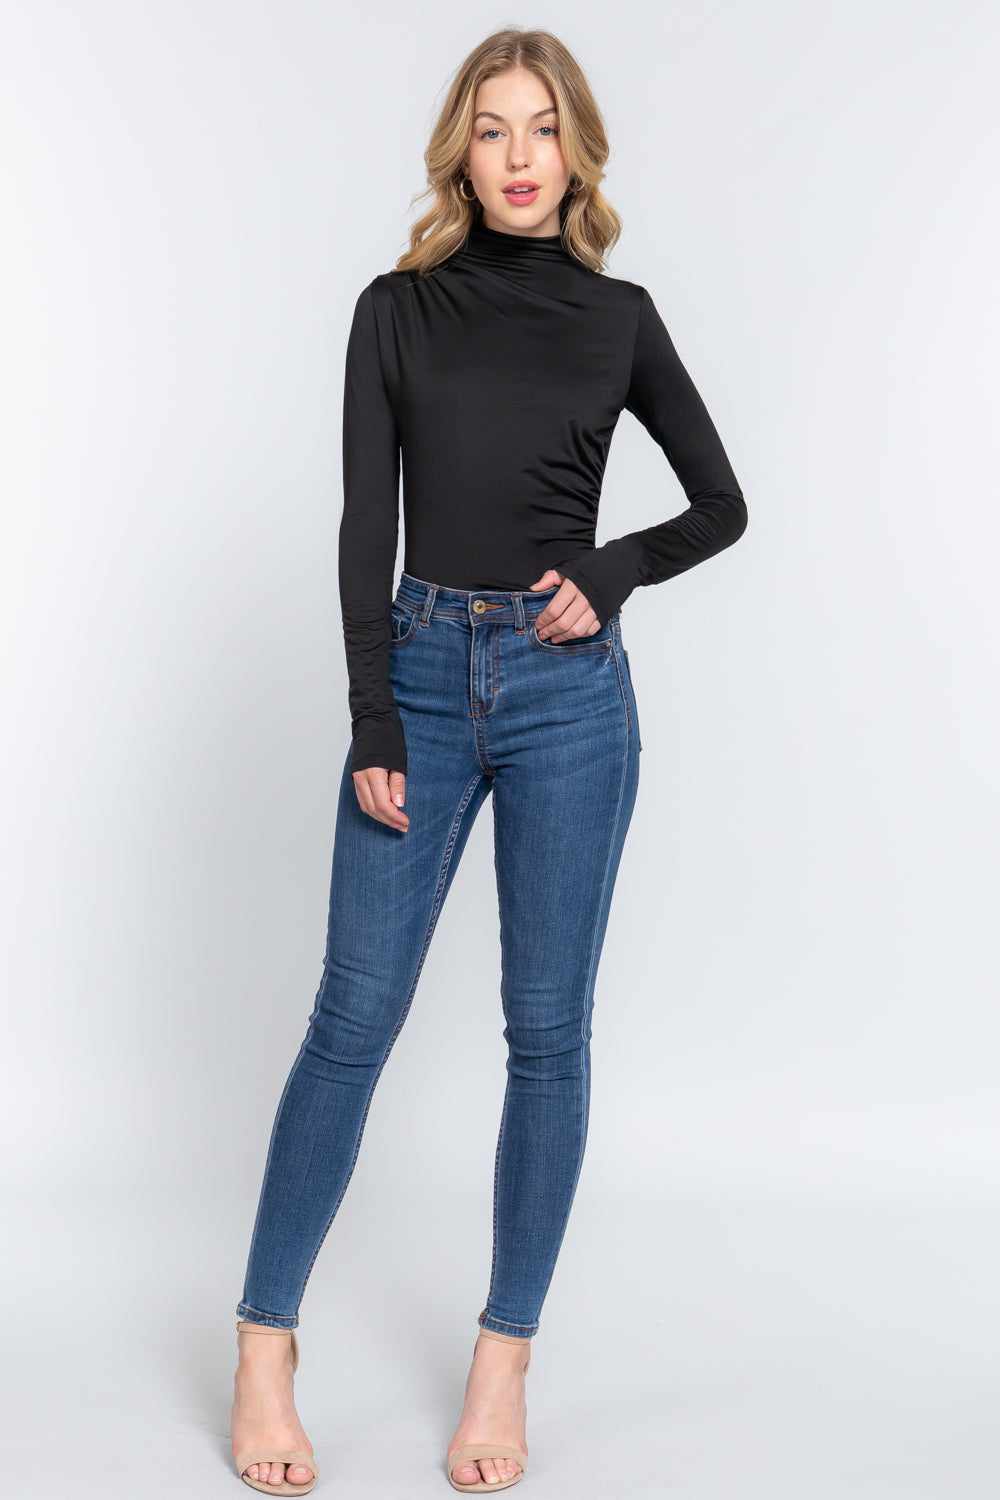 Black - Long Sleeve High Neck Shirring Detail Ity Knit Bodysuit - 3 colors - womens bodysuit at TFC&H Co.